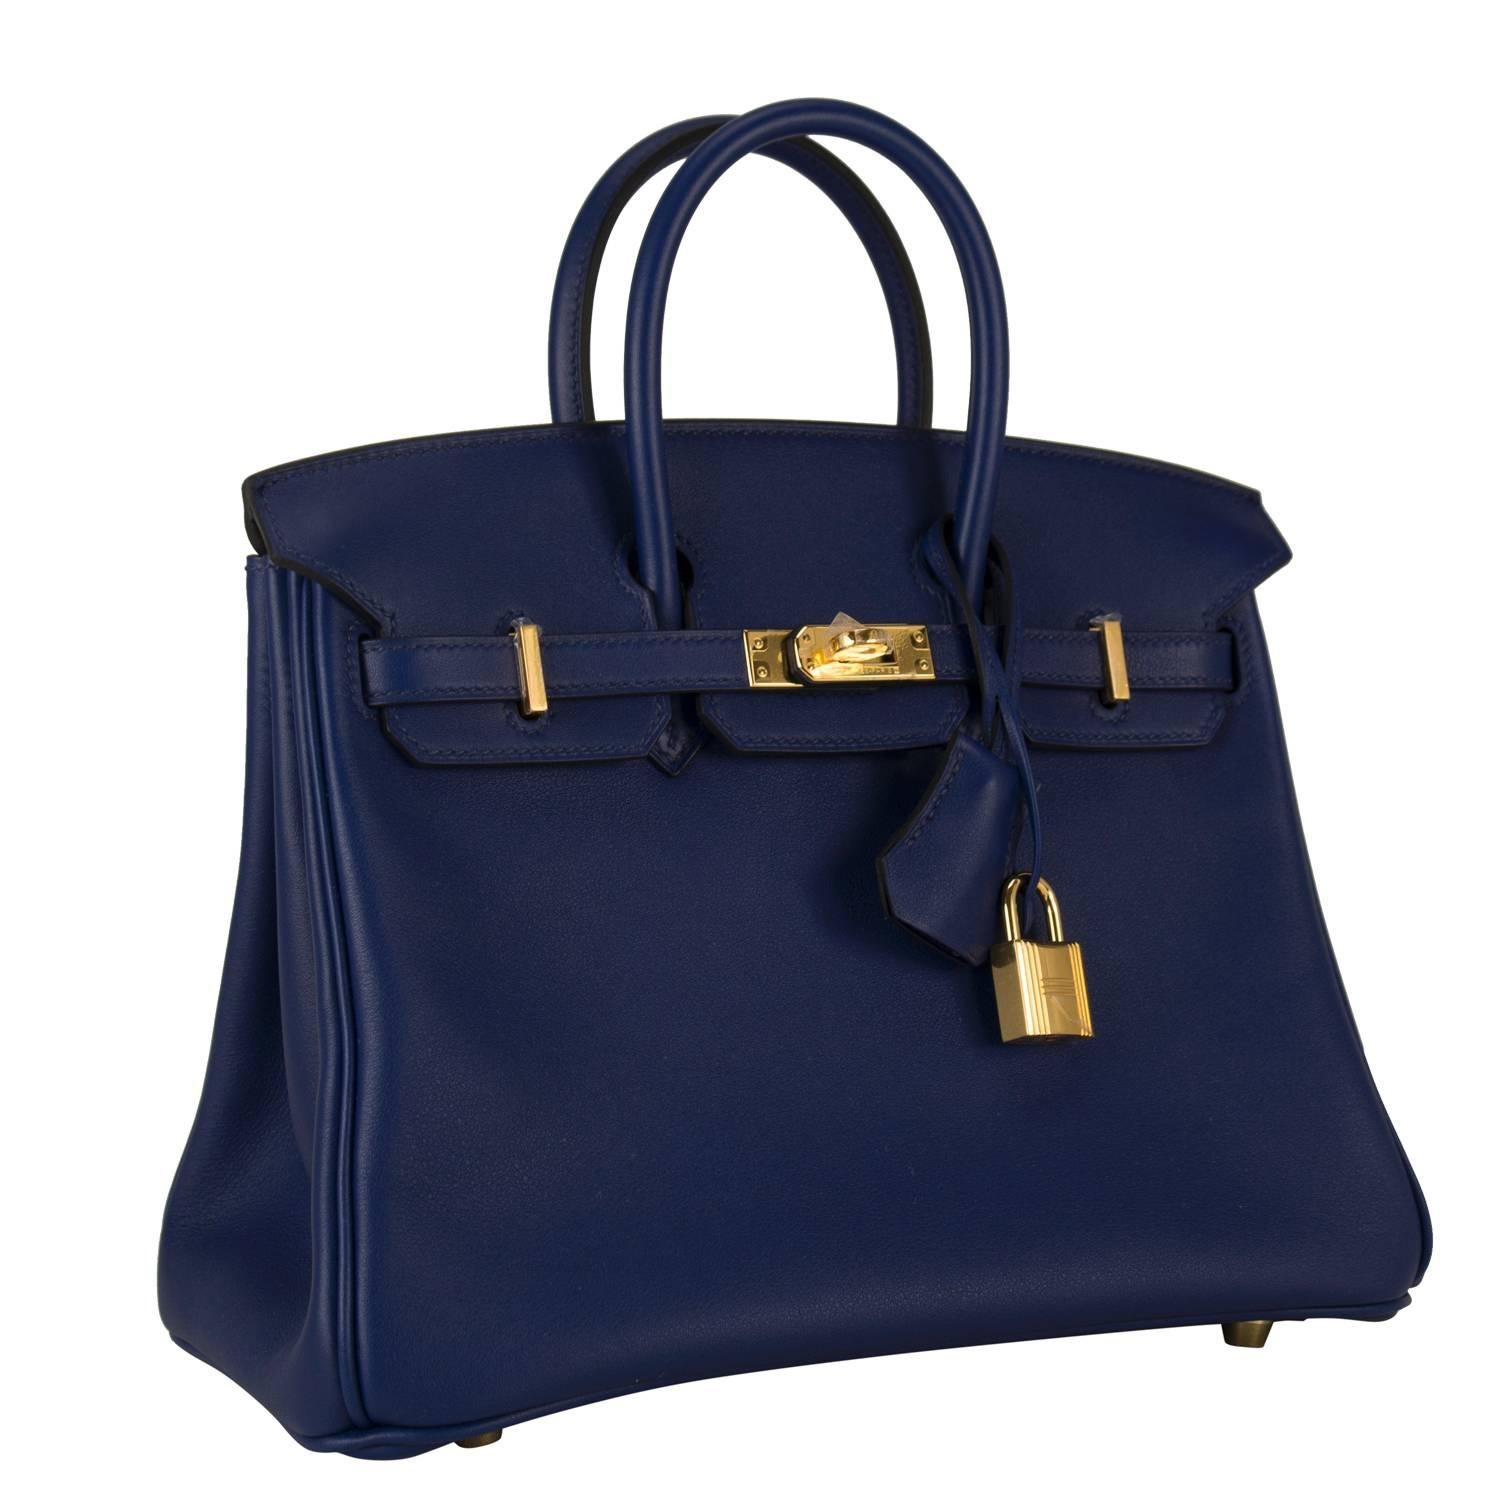 Hermes Handbag Birkin 25 Swift Leather 73 Blue Saphir Gold Hardware 2015.

Pre-owned and never used.

Bought it in Hermes store in 2015.

Composition; Leather.

Model; BIRKIN.

Size; 25cm width x 20cm height x 13cm length.

Color; BLEU